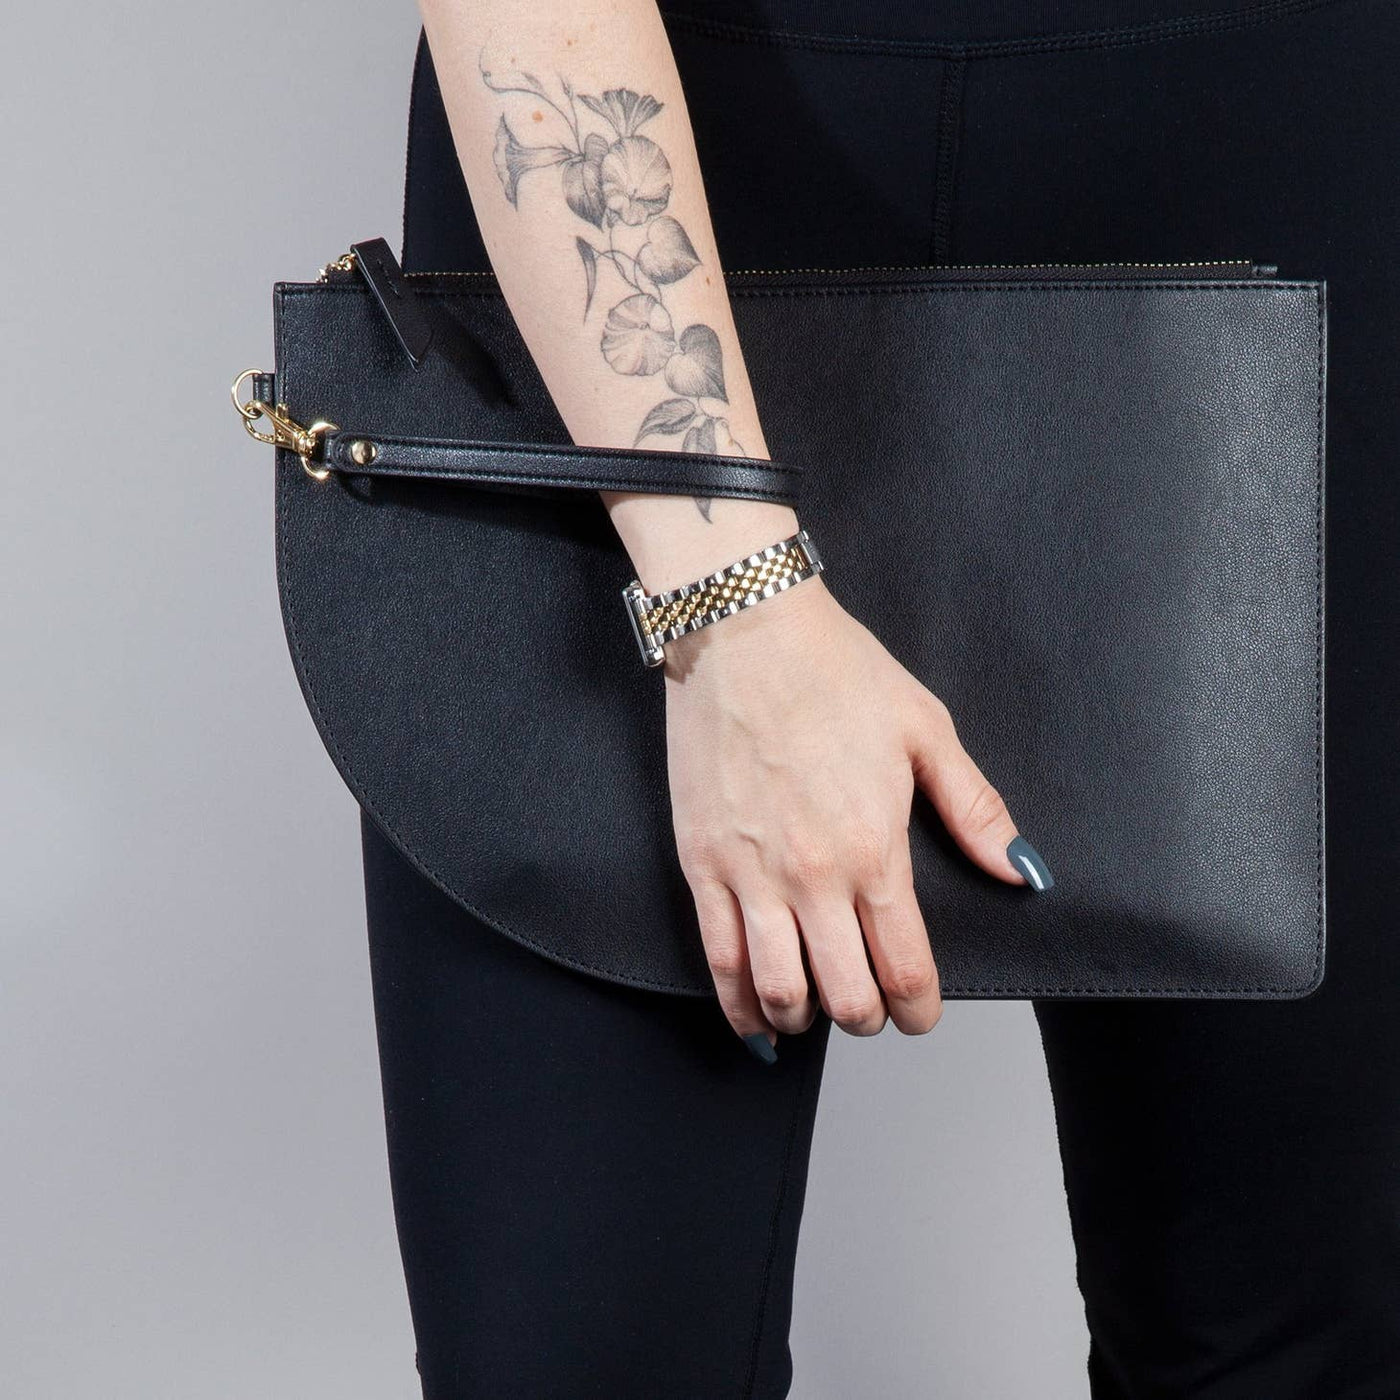 Model holding a black vegan leather flat clutch bag with gold zipper and removable wrist strap